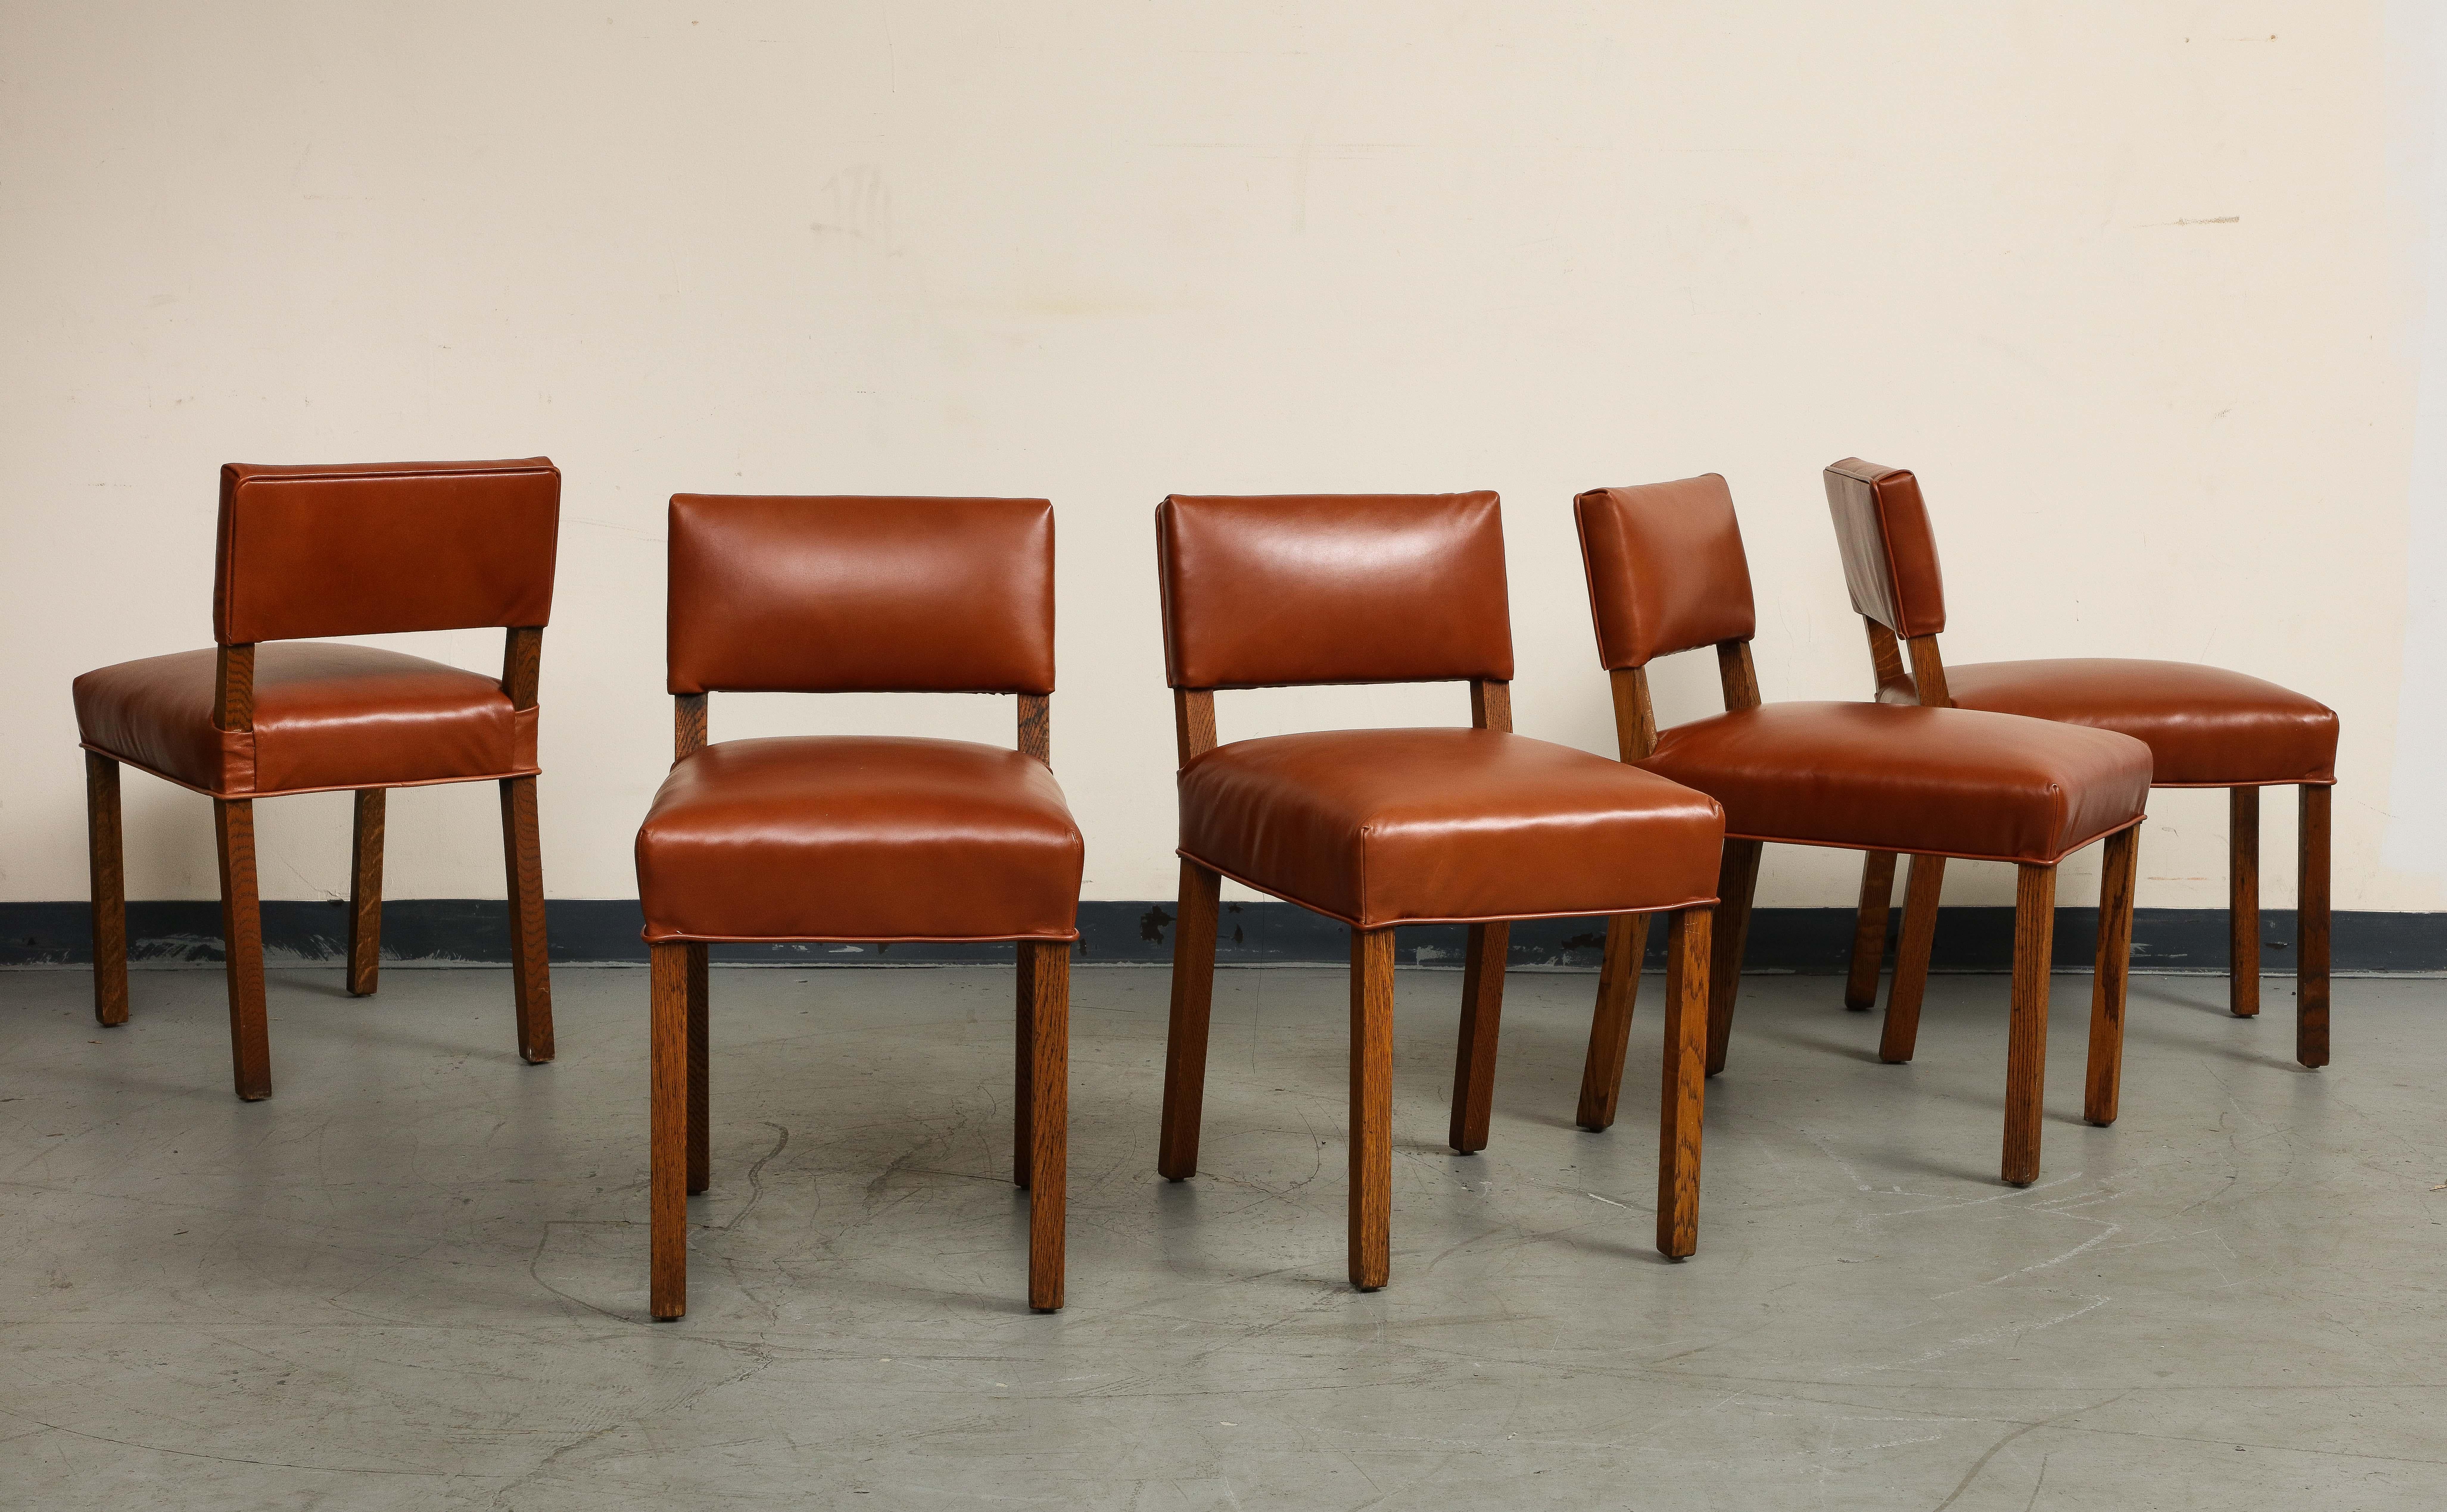 A fine set of five (5) mid-century French oak and brown leather side chairs. Reupholstered seat and back in brown leather in 2022, self welt along bottom of seat. Not used since the upholstery was redone. 

Dimensions: 
31